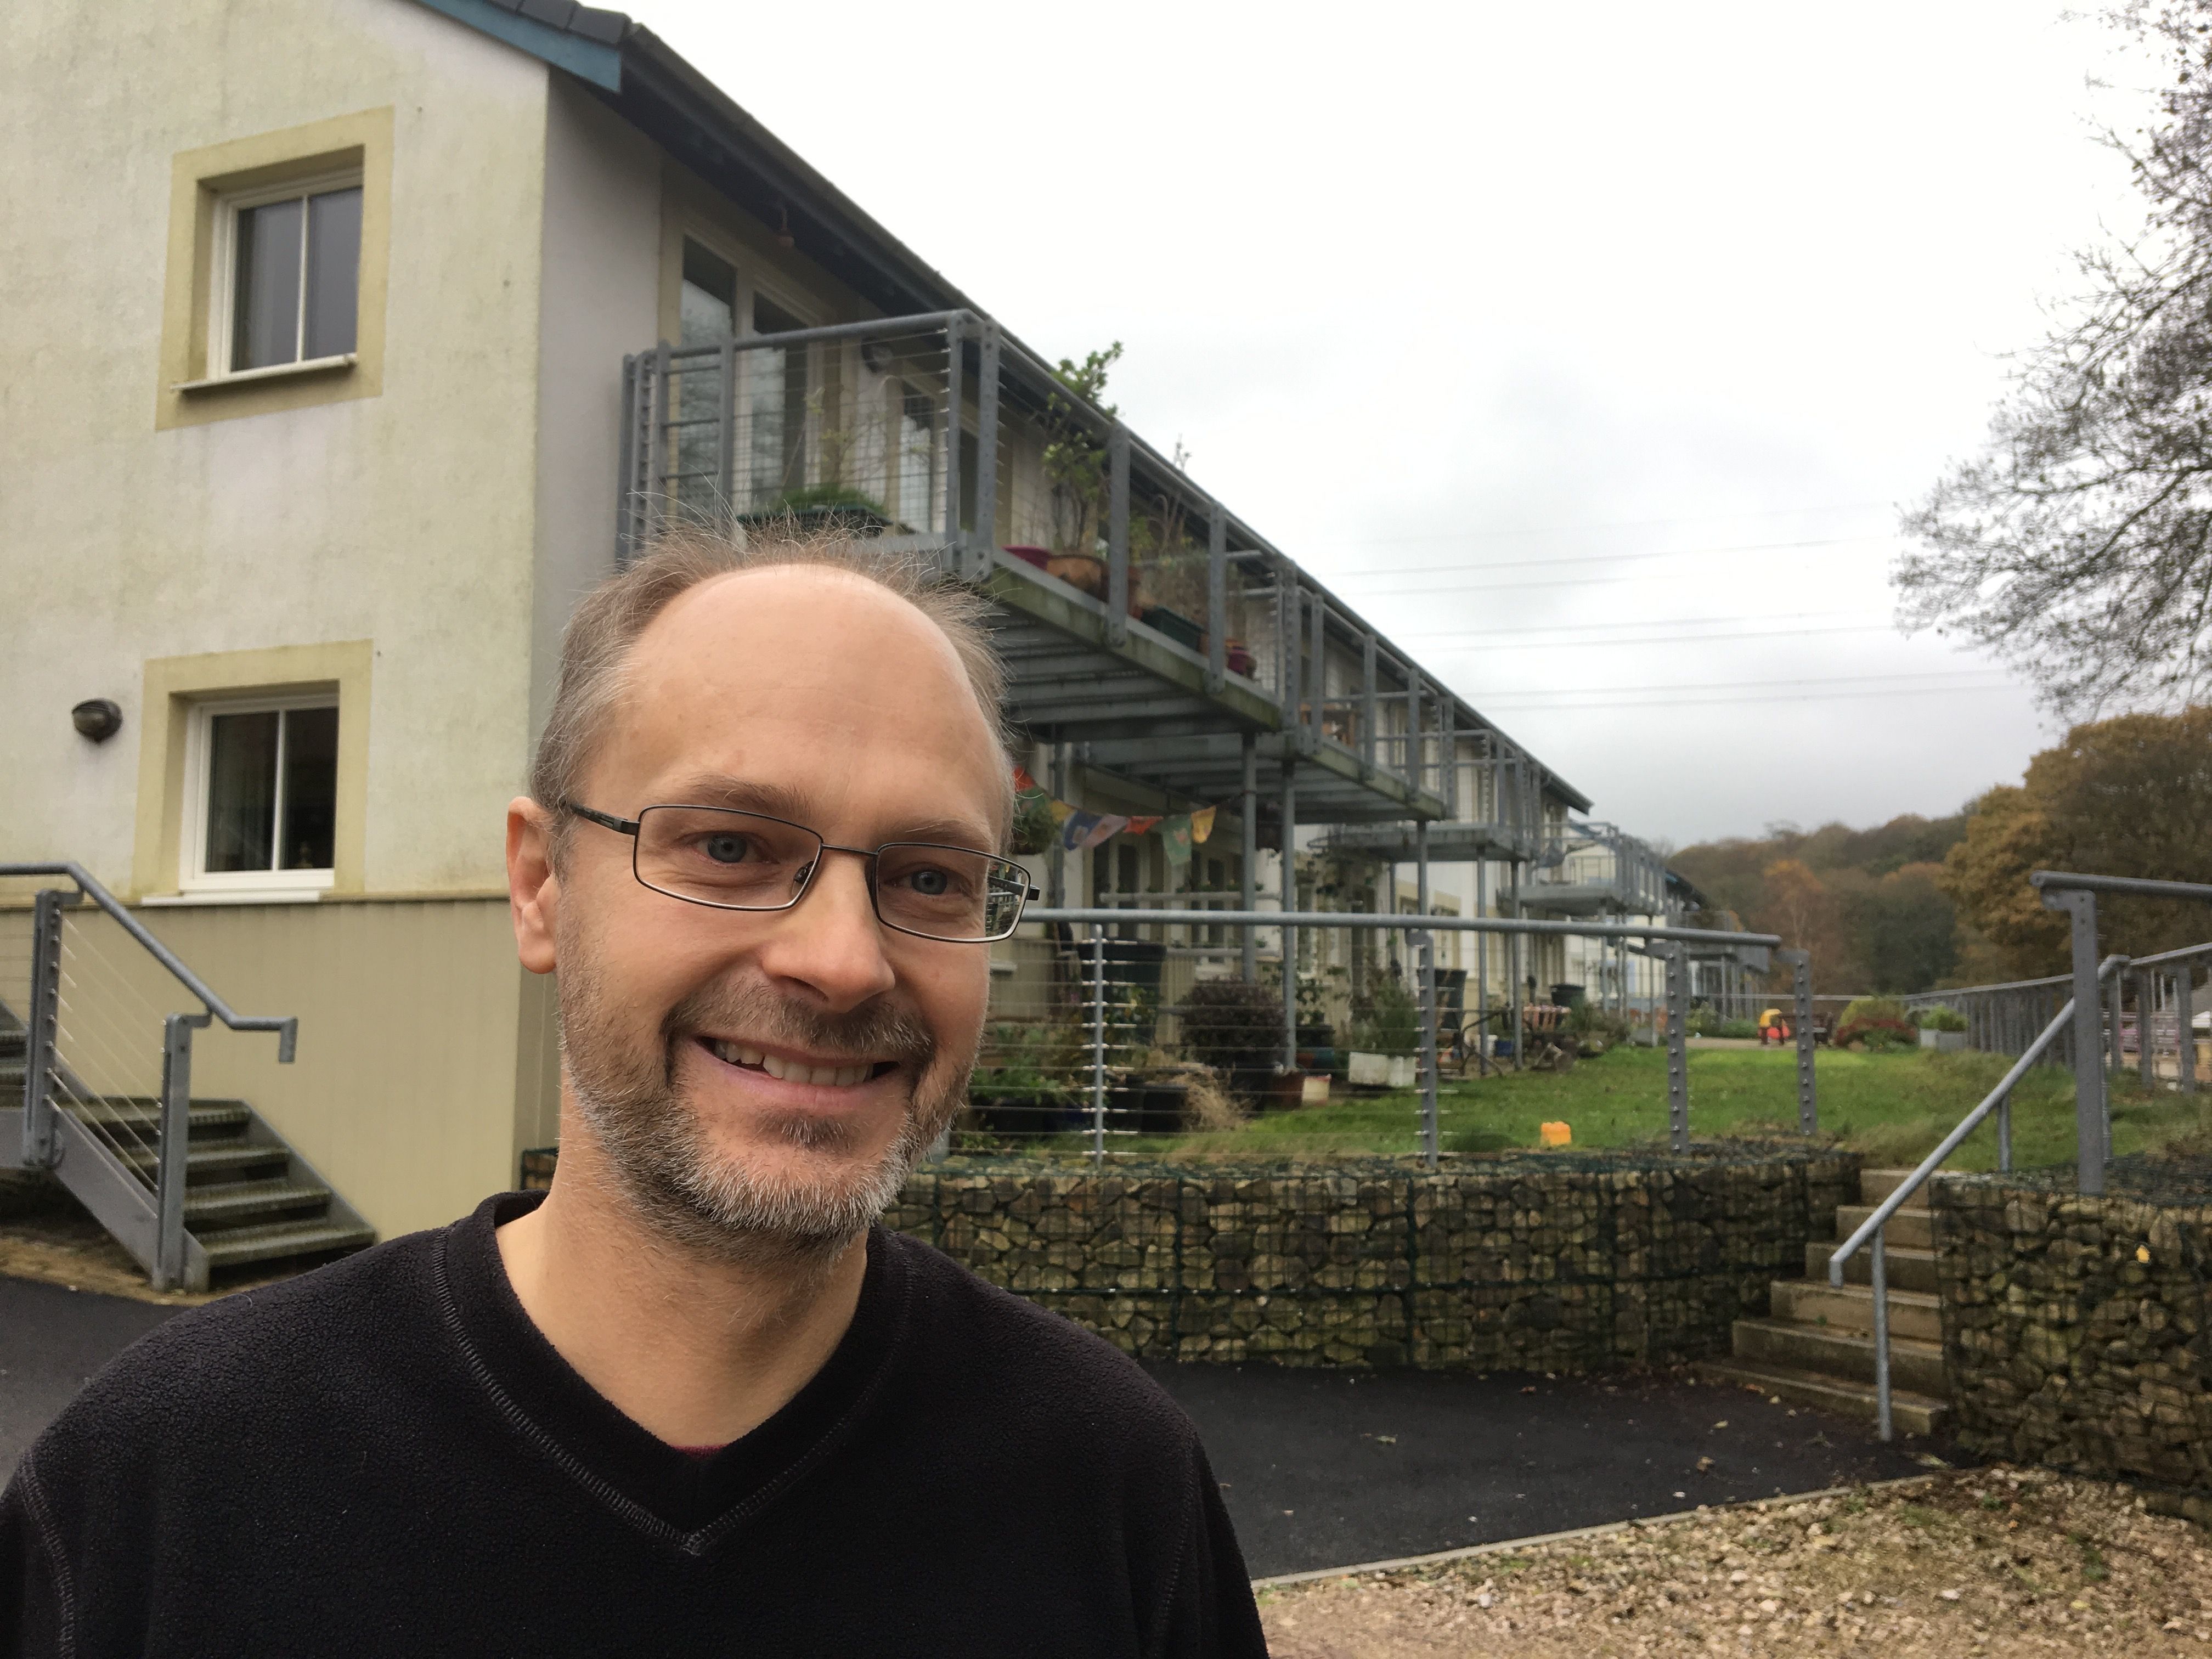 Stuart Parkinson, executive director of Scientists for Global Responsibility, and one of the founders of an eco-community outside Lancaster. Image by Matt Kennard. United Kingdom, 2017.